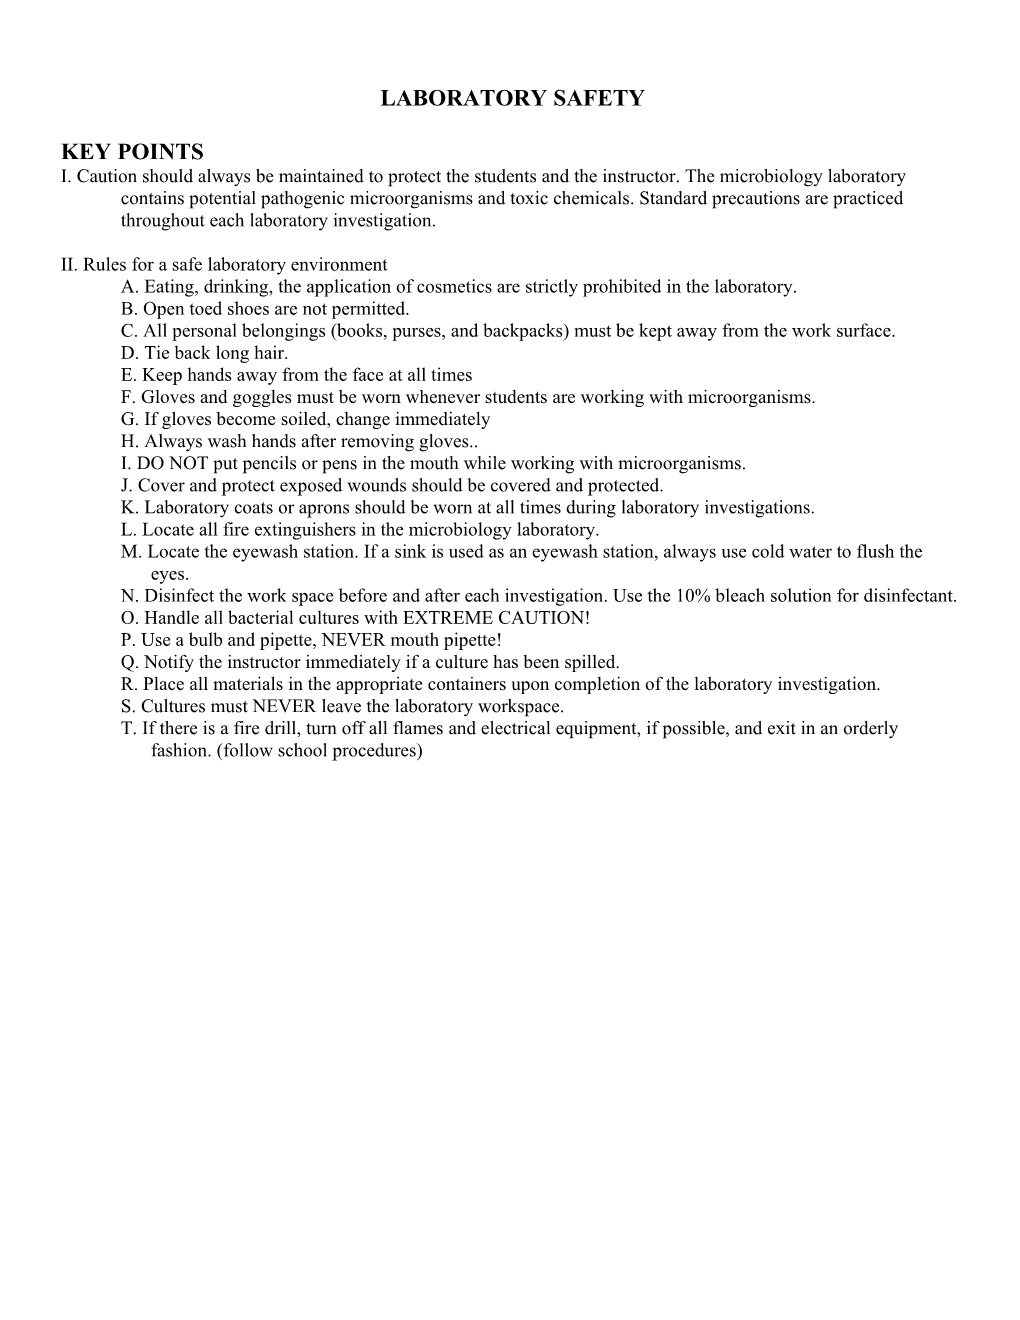 II. Rules for a Safe Laboratory Environment